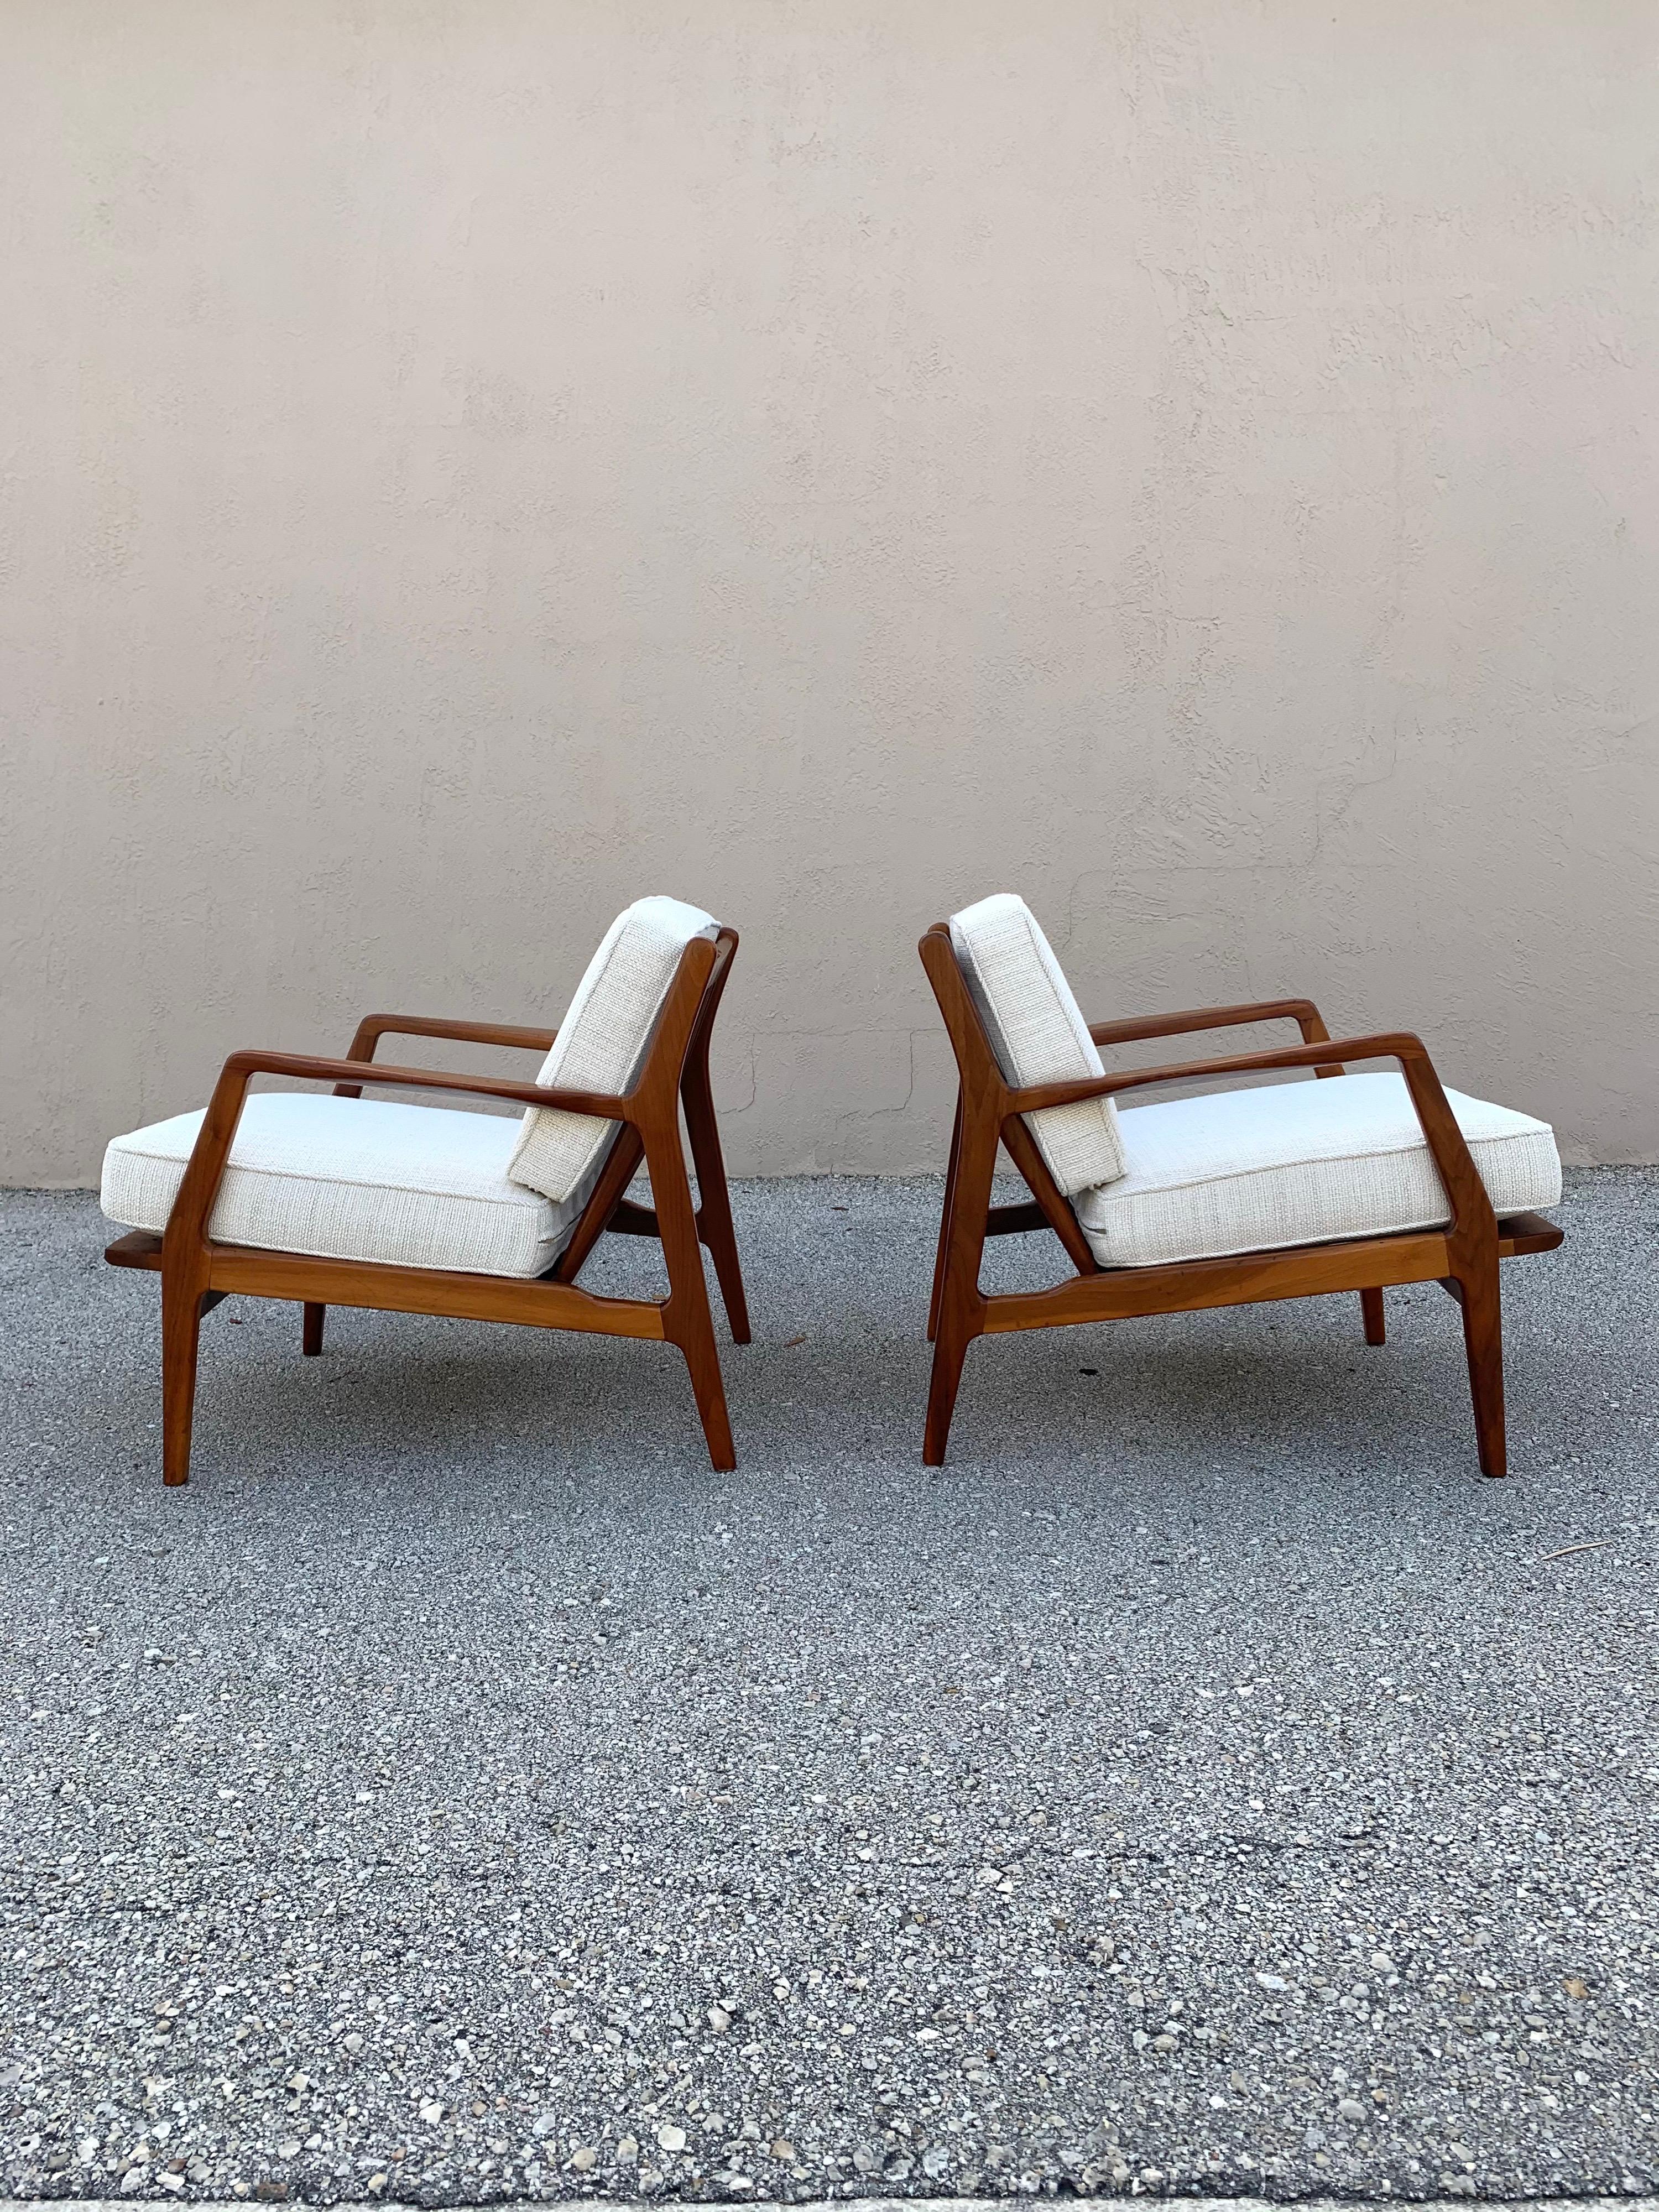 Pair of IB Kofod Larsen lounge chairs. Vintage from Denmark. Not tagged. Frames have been completely refinished in a process that still preserves some of the wear from their 60+ years of life. Some light scratching and marking. A new hand rubbed